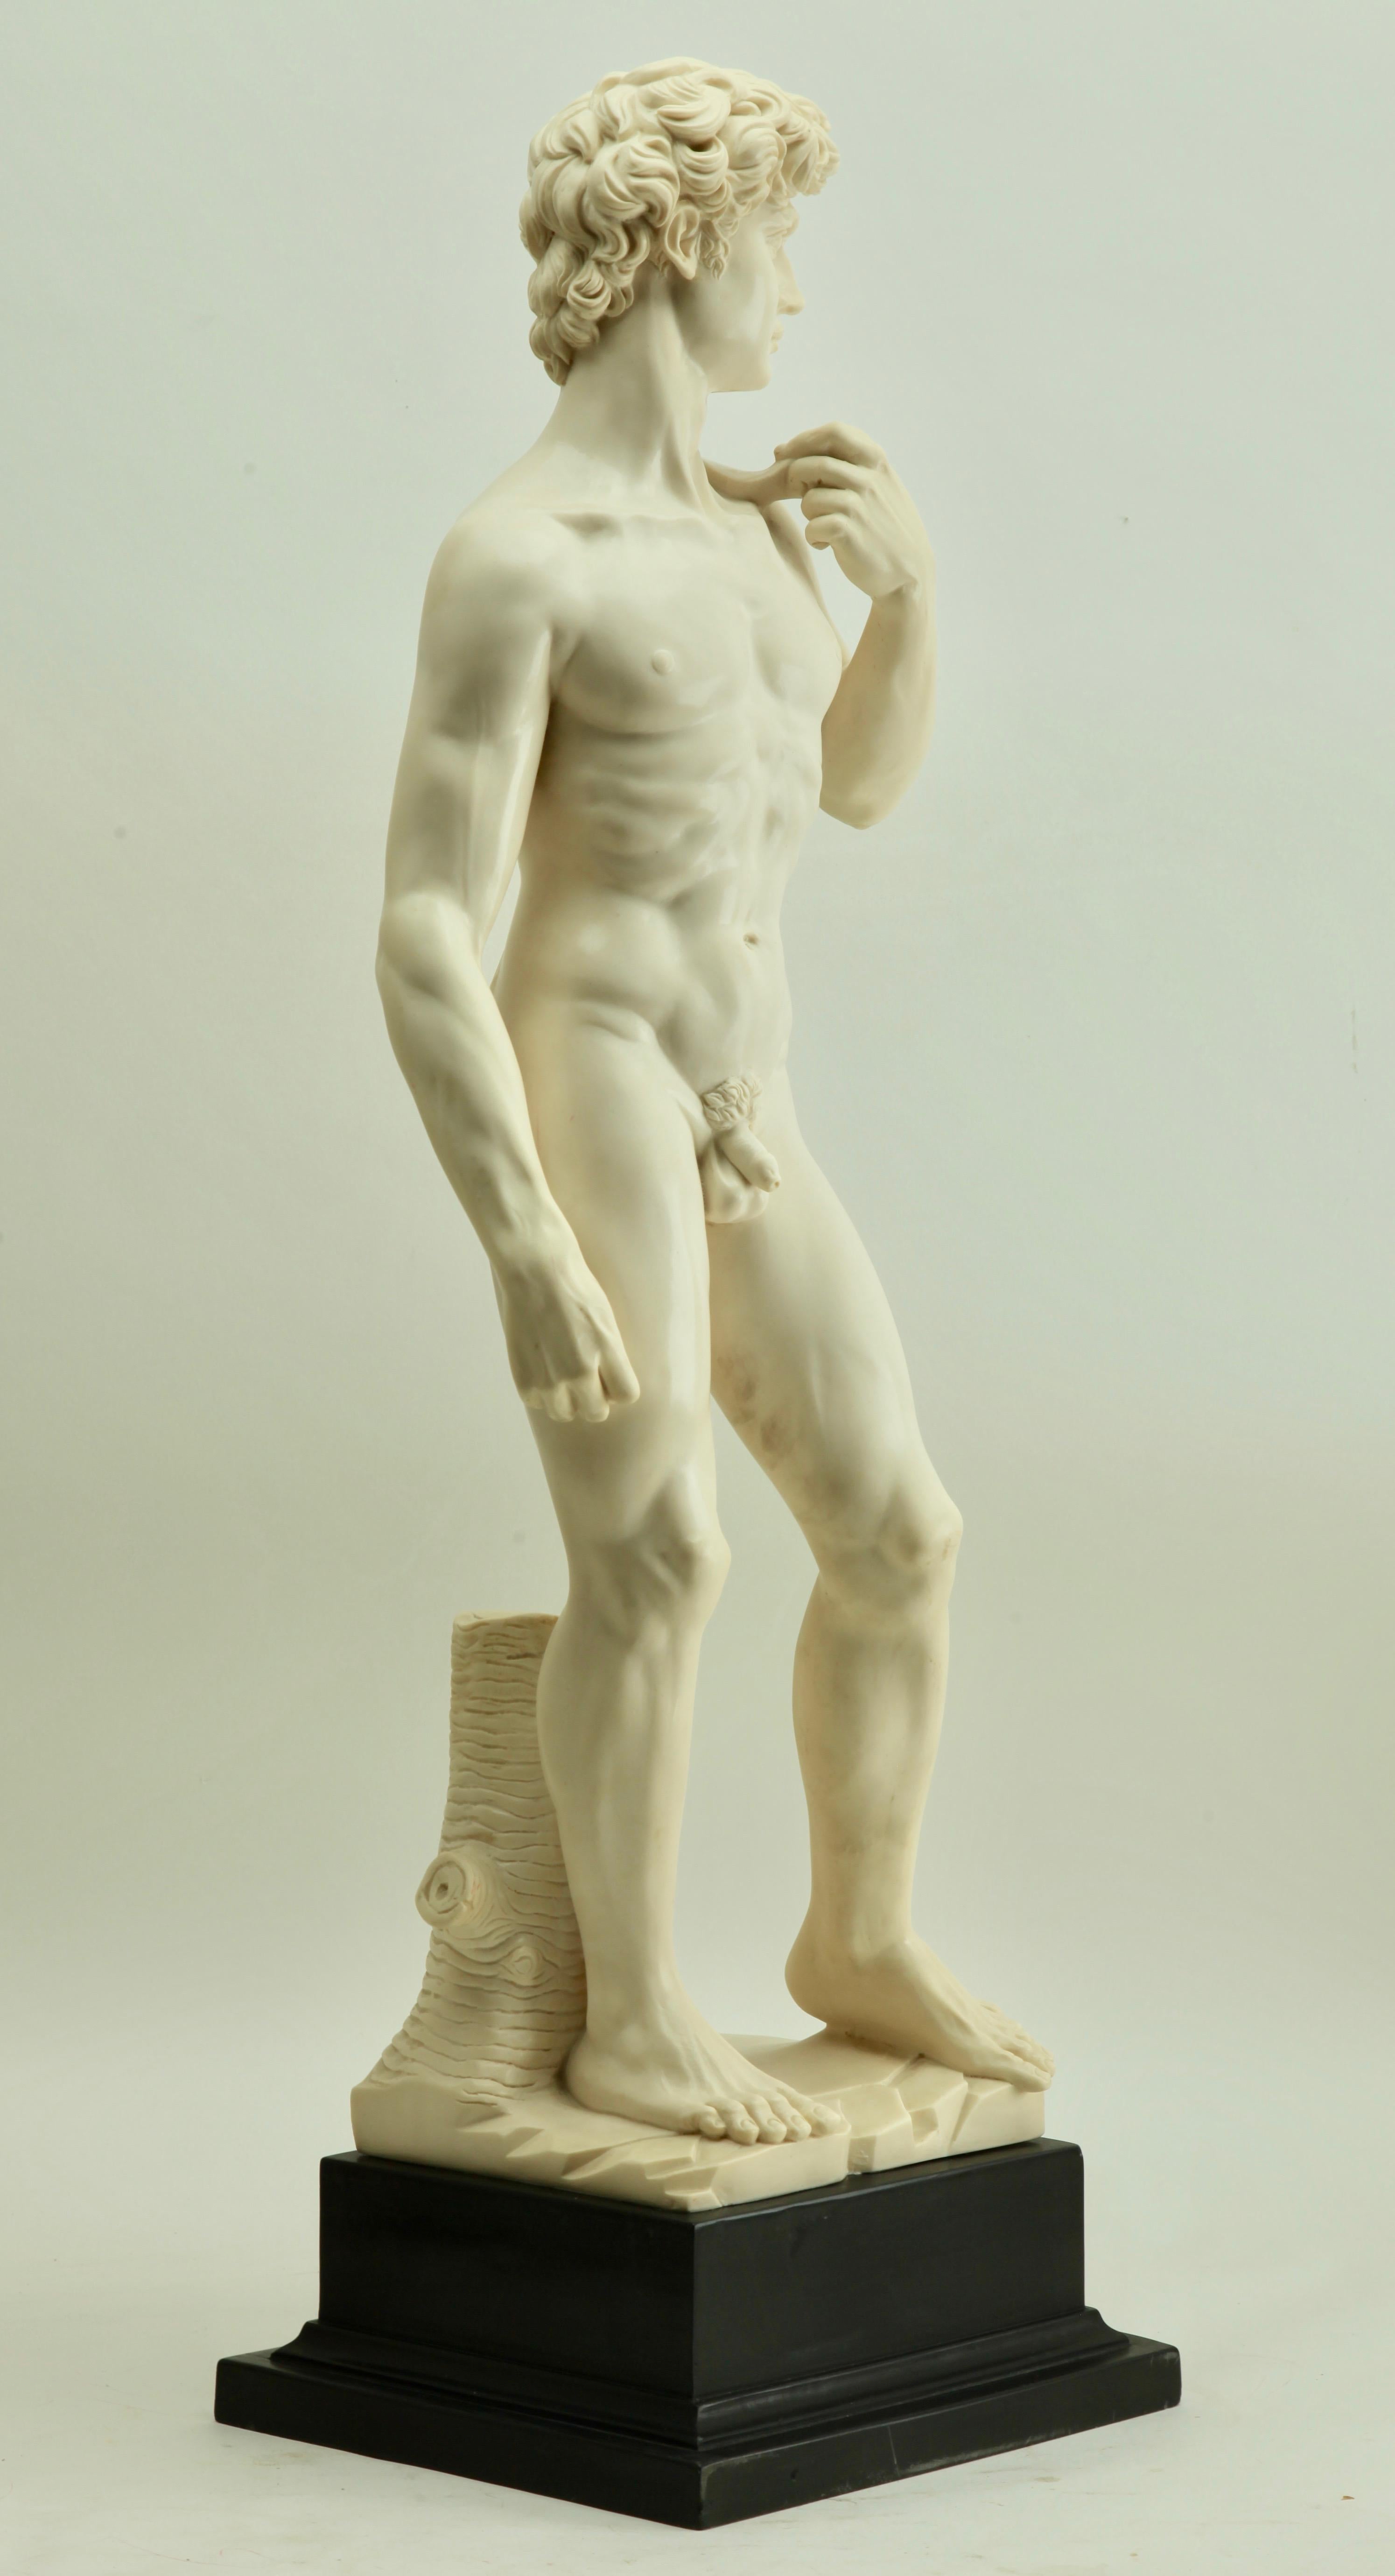 Late 20th Century Detailed and Stylized Roman Statue of the 'David' Sculpted by G Ruggeri